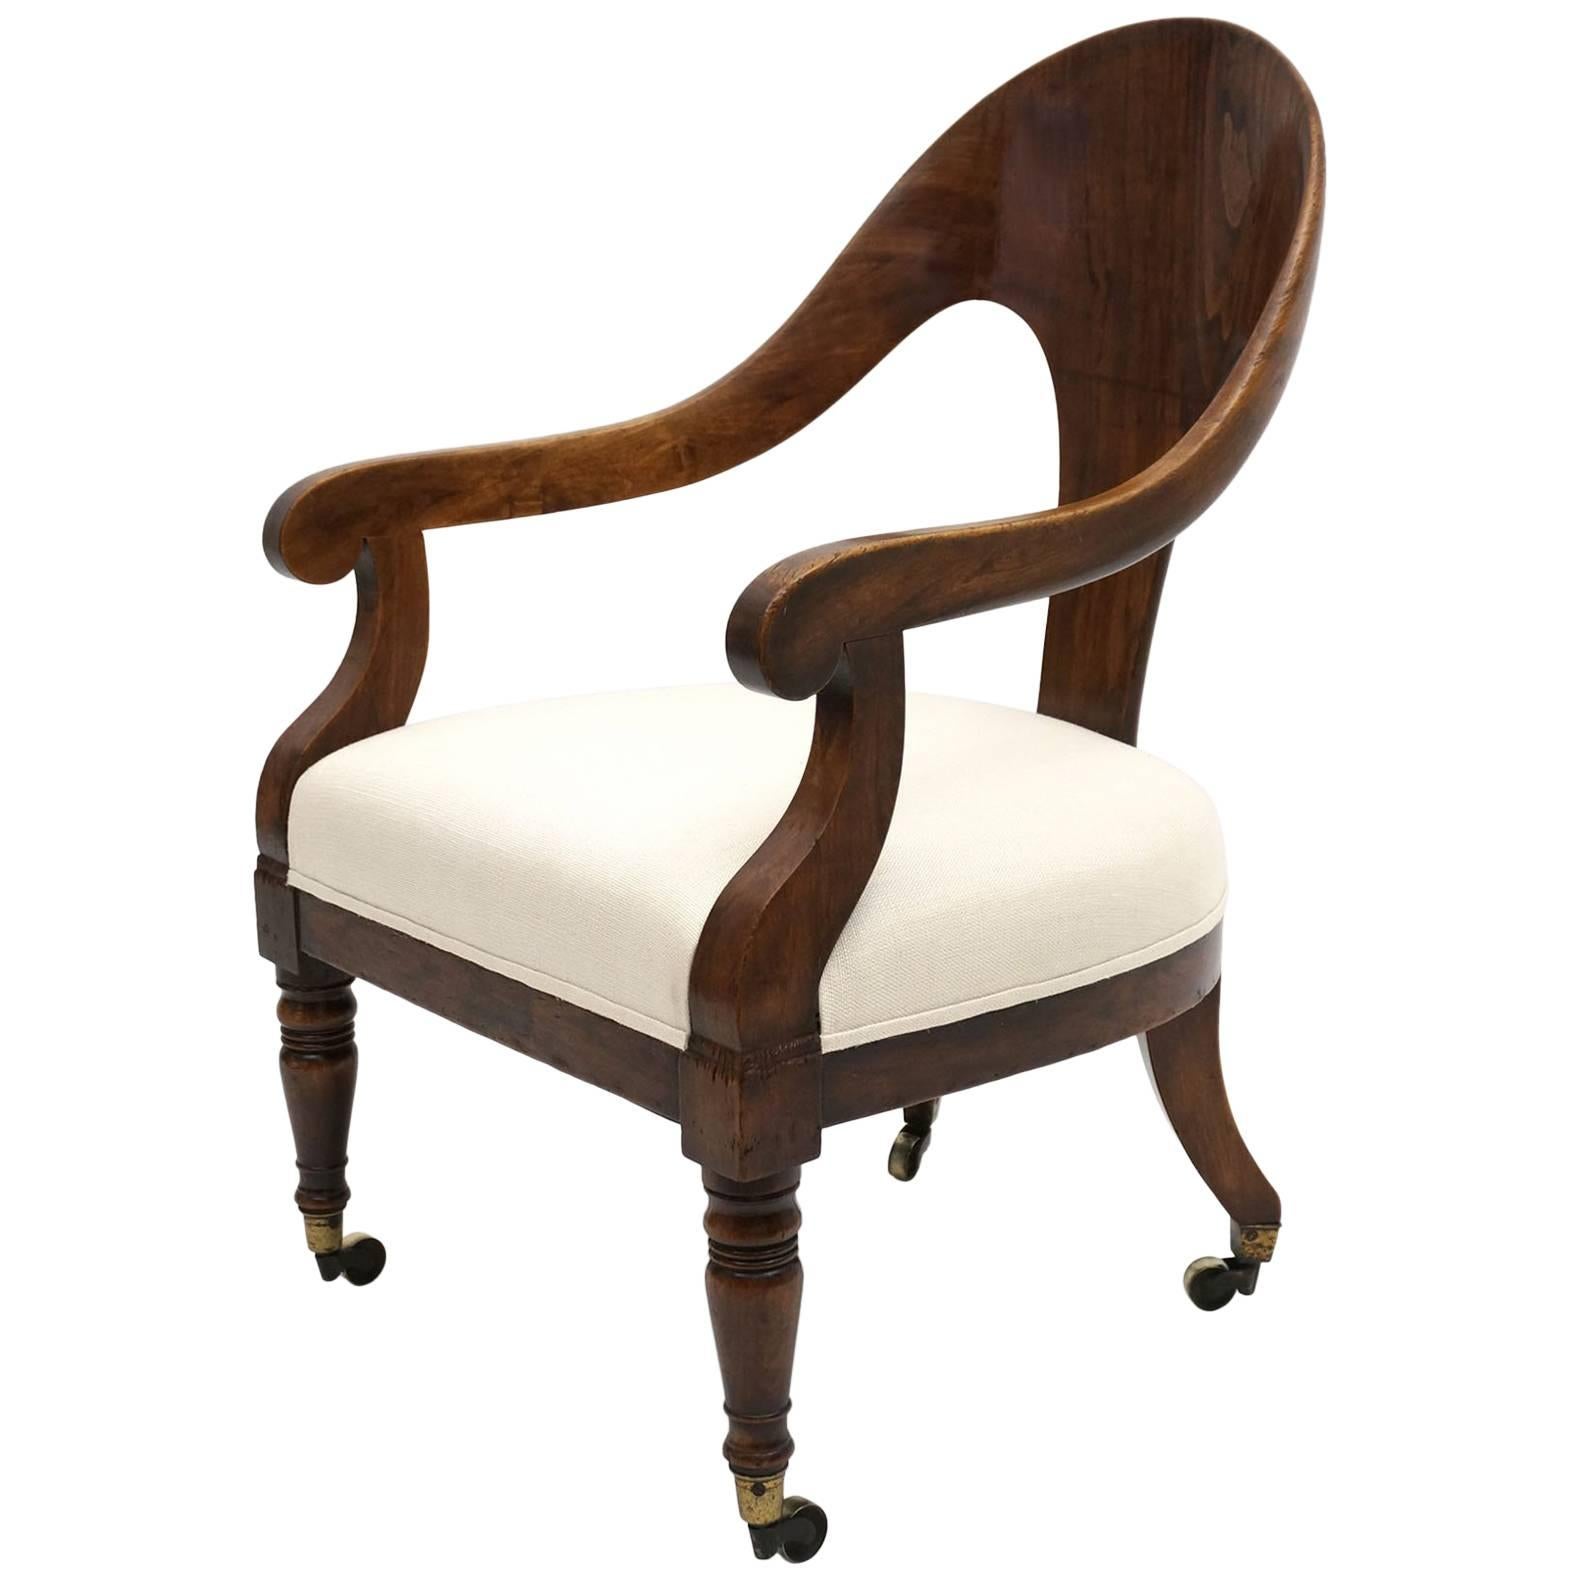 19th Century Rosewood Spoon Back Chair, England, circa 1830